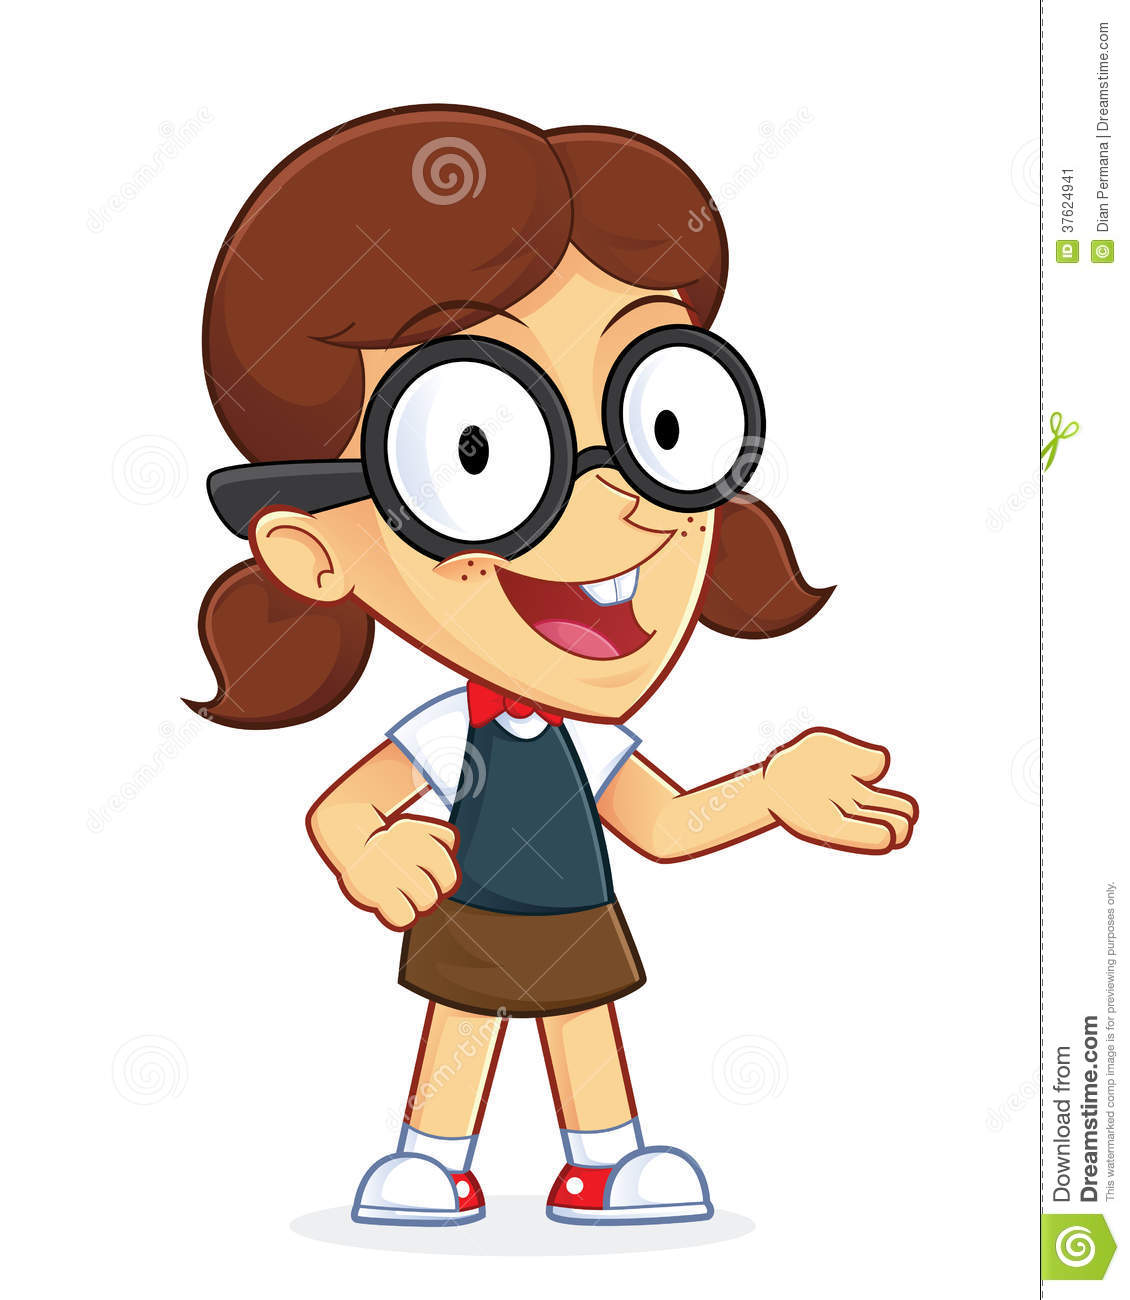 Clipart Picture Of A Girl Geek Cartoon Character In Welcoming Gesture